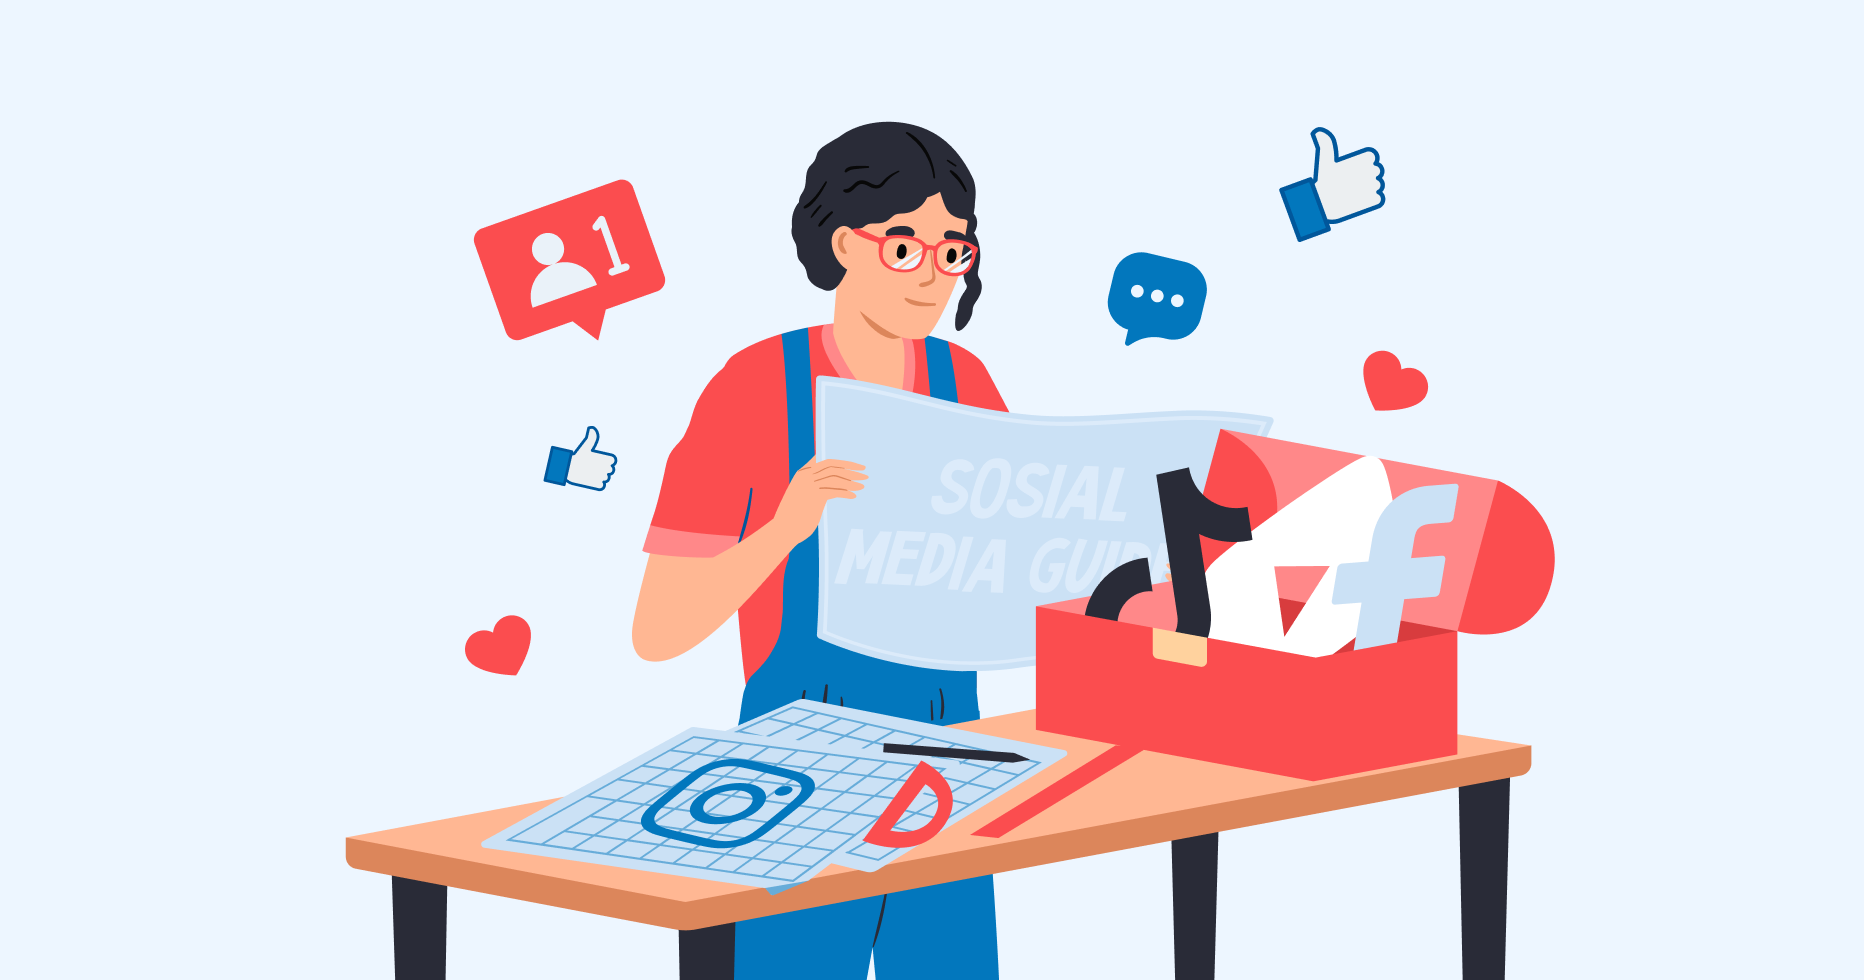 How to Increase Ecommerce Sales: 7 Effective Ways To Get More Clients Via Social Media